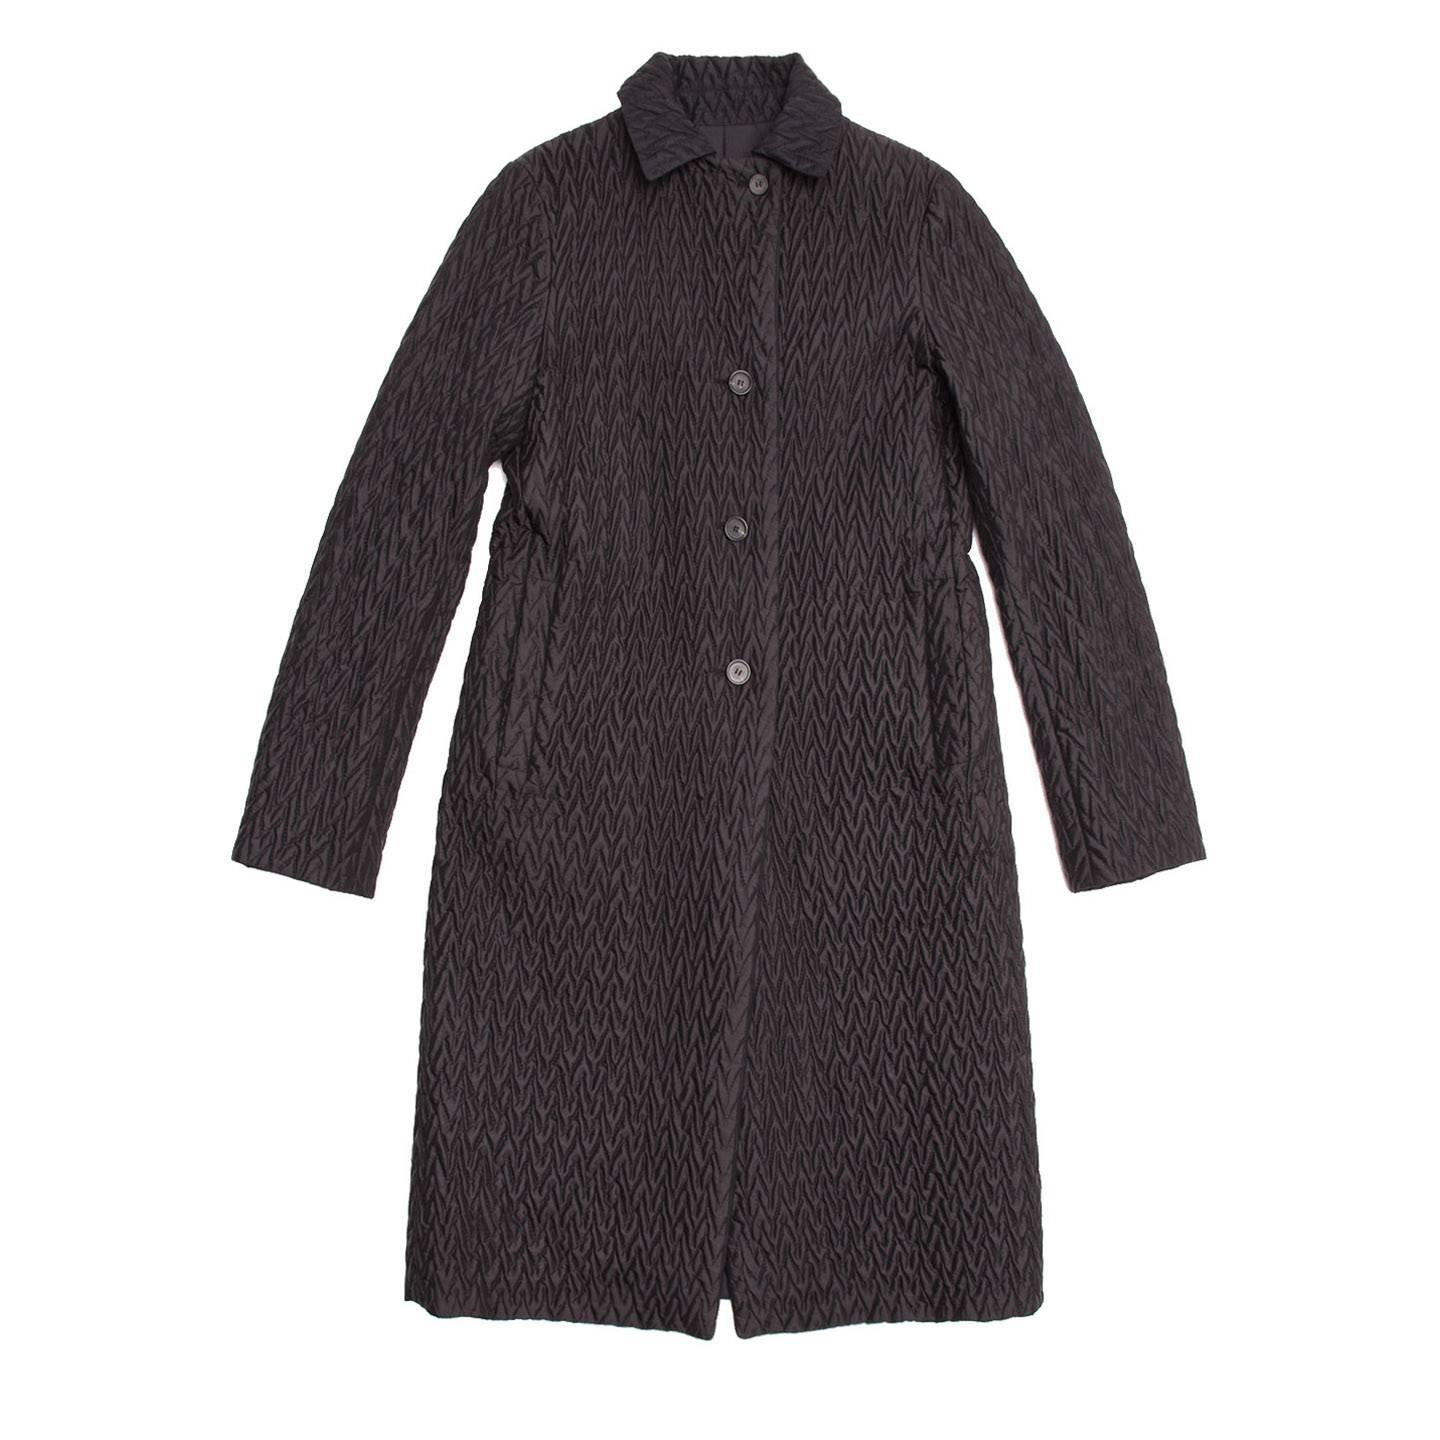 Long black herringbone quilted coat that reverses to a smooth slick nylon side. 4 buttoned closure with 2 single welt pockets at front.

Size  38 French sizing

Condition  Excellent: worn a few times